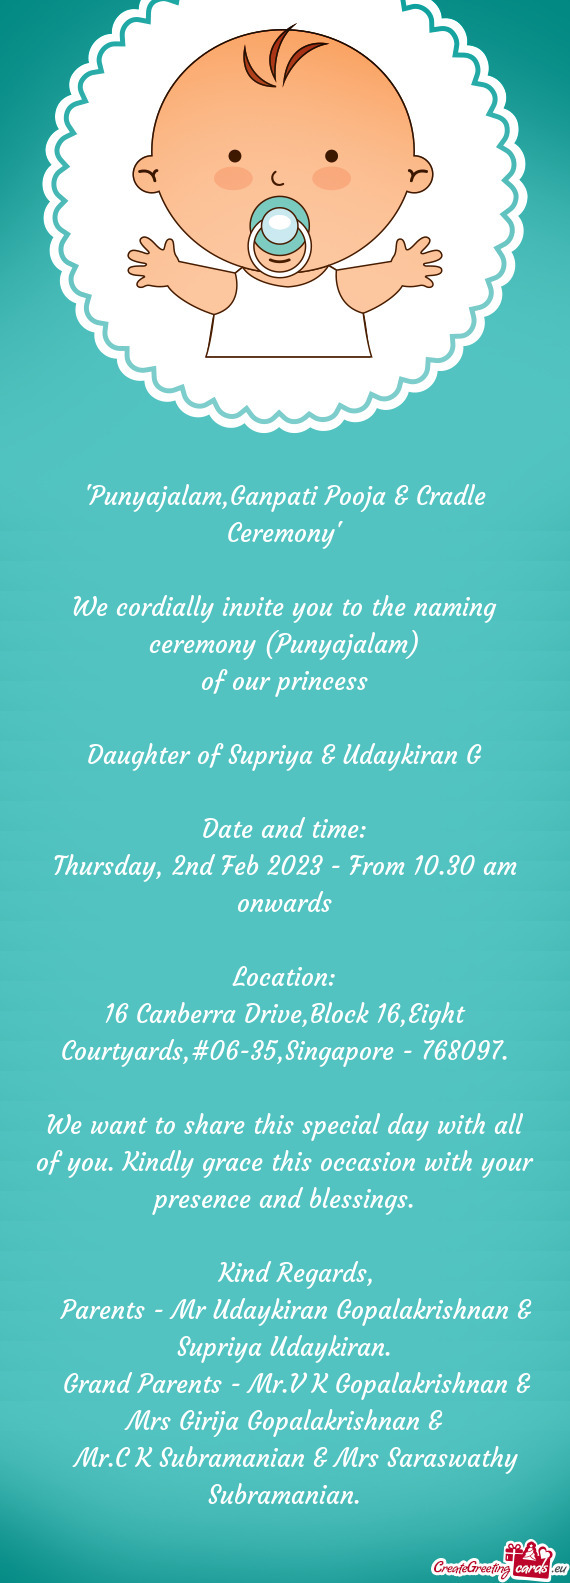 We cordially invite you to the naming ceremony (Punyajalam)